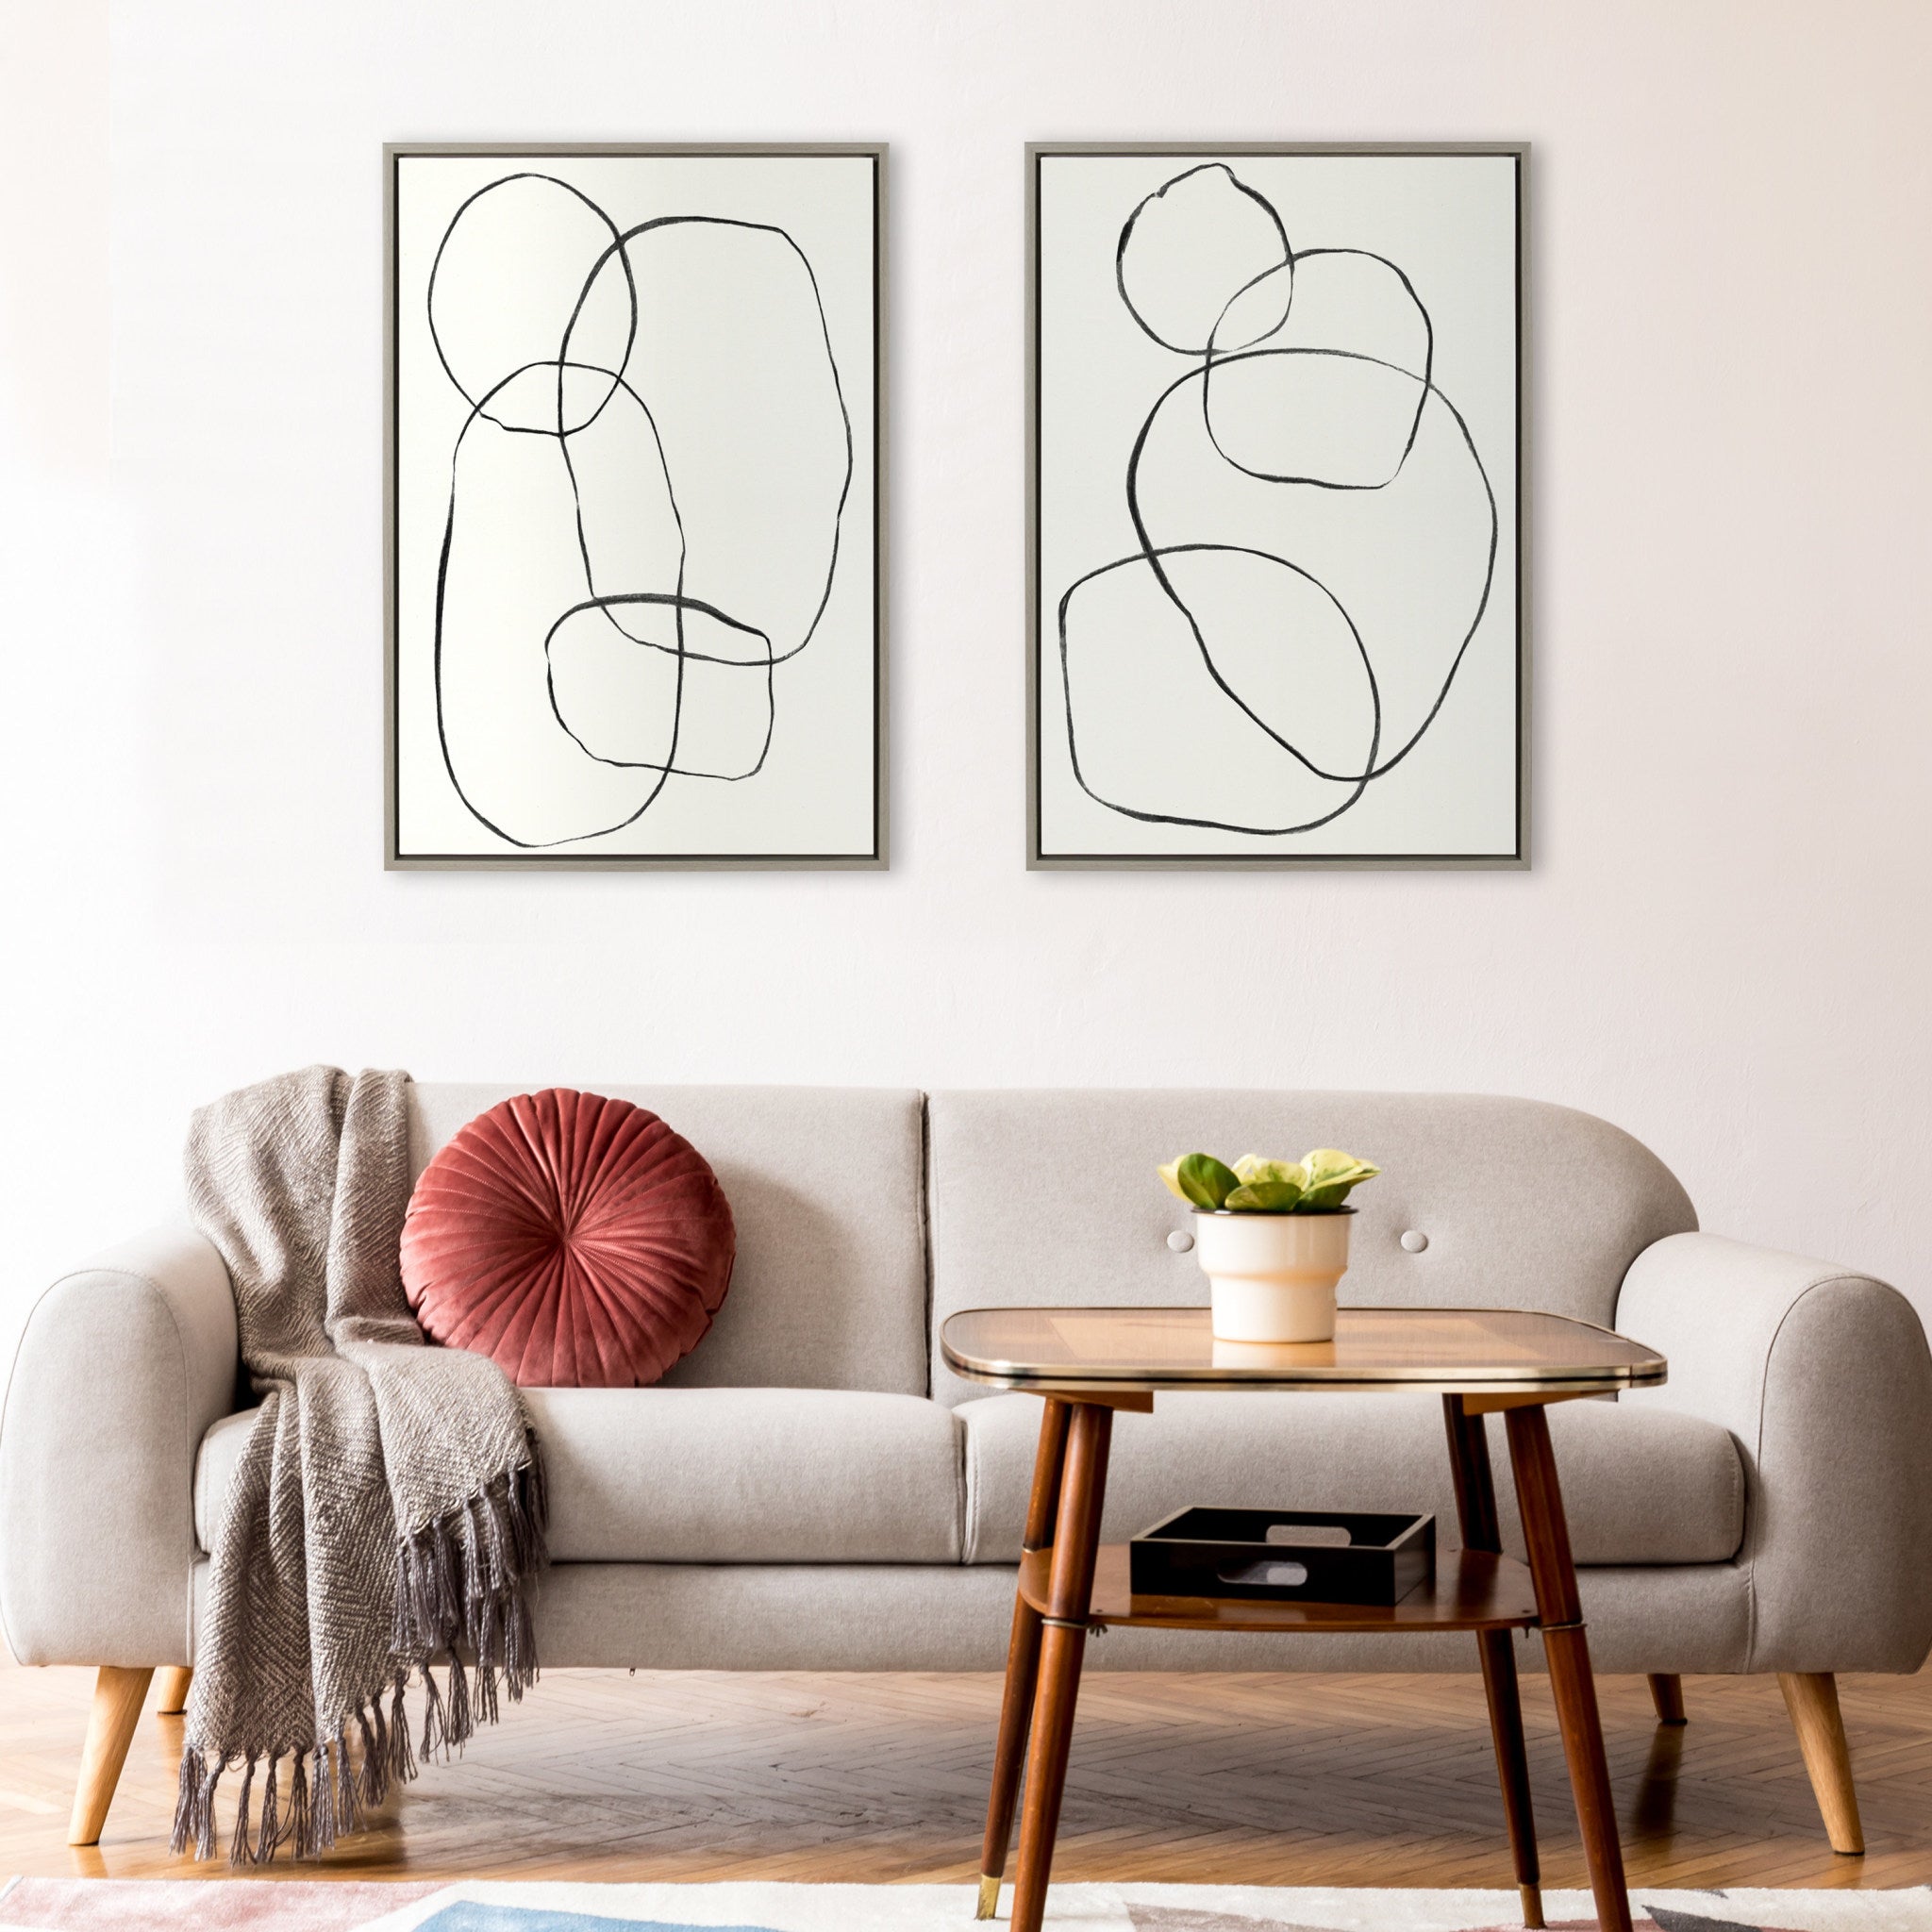 Sylvie 871 Modern Circles Flinen (left) & 869 Going in Circles Flinen (right) Framed Canvas by Teju Reval of SnazzyHues